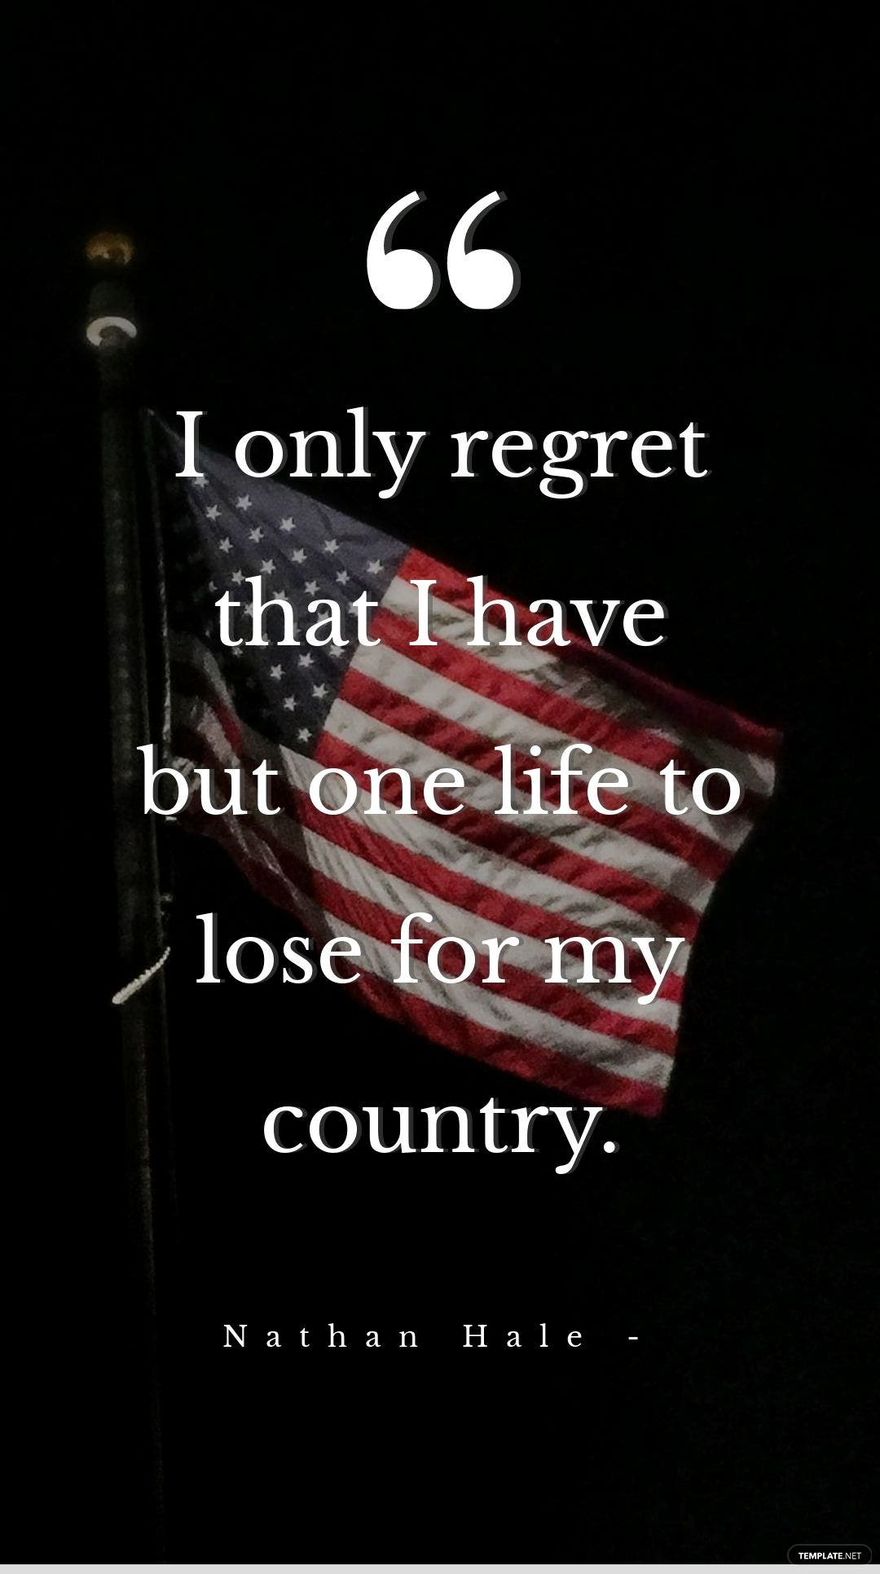 Nathan Hale - I only regret that I have but one life to lose for my country.